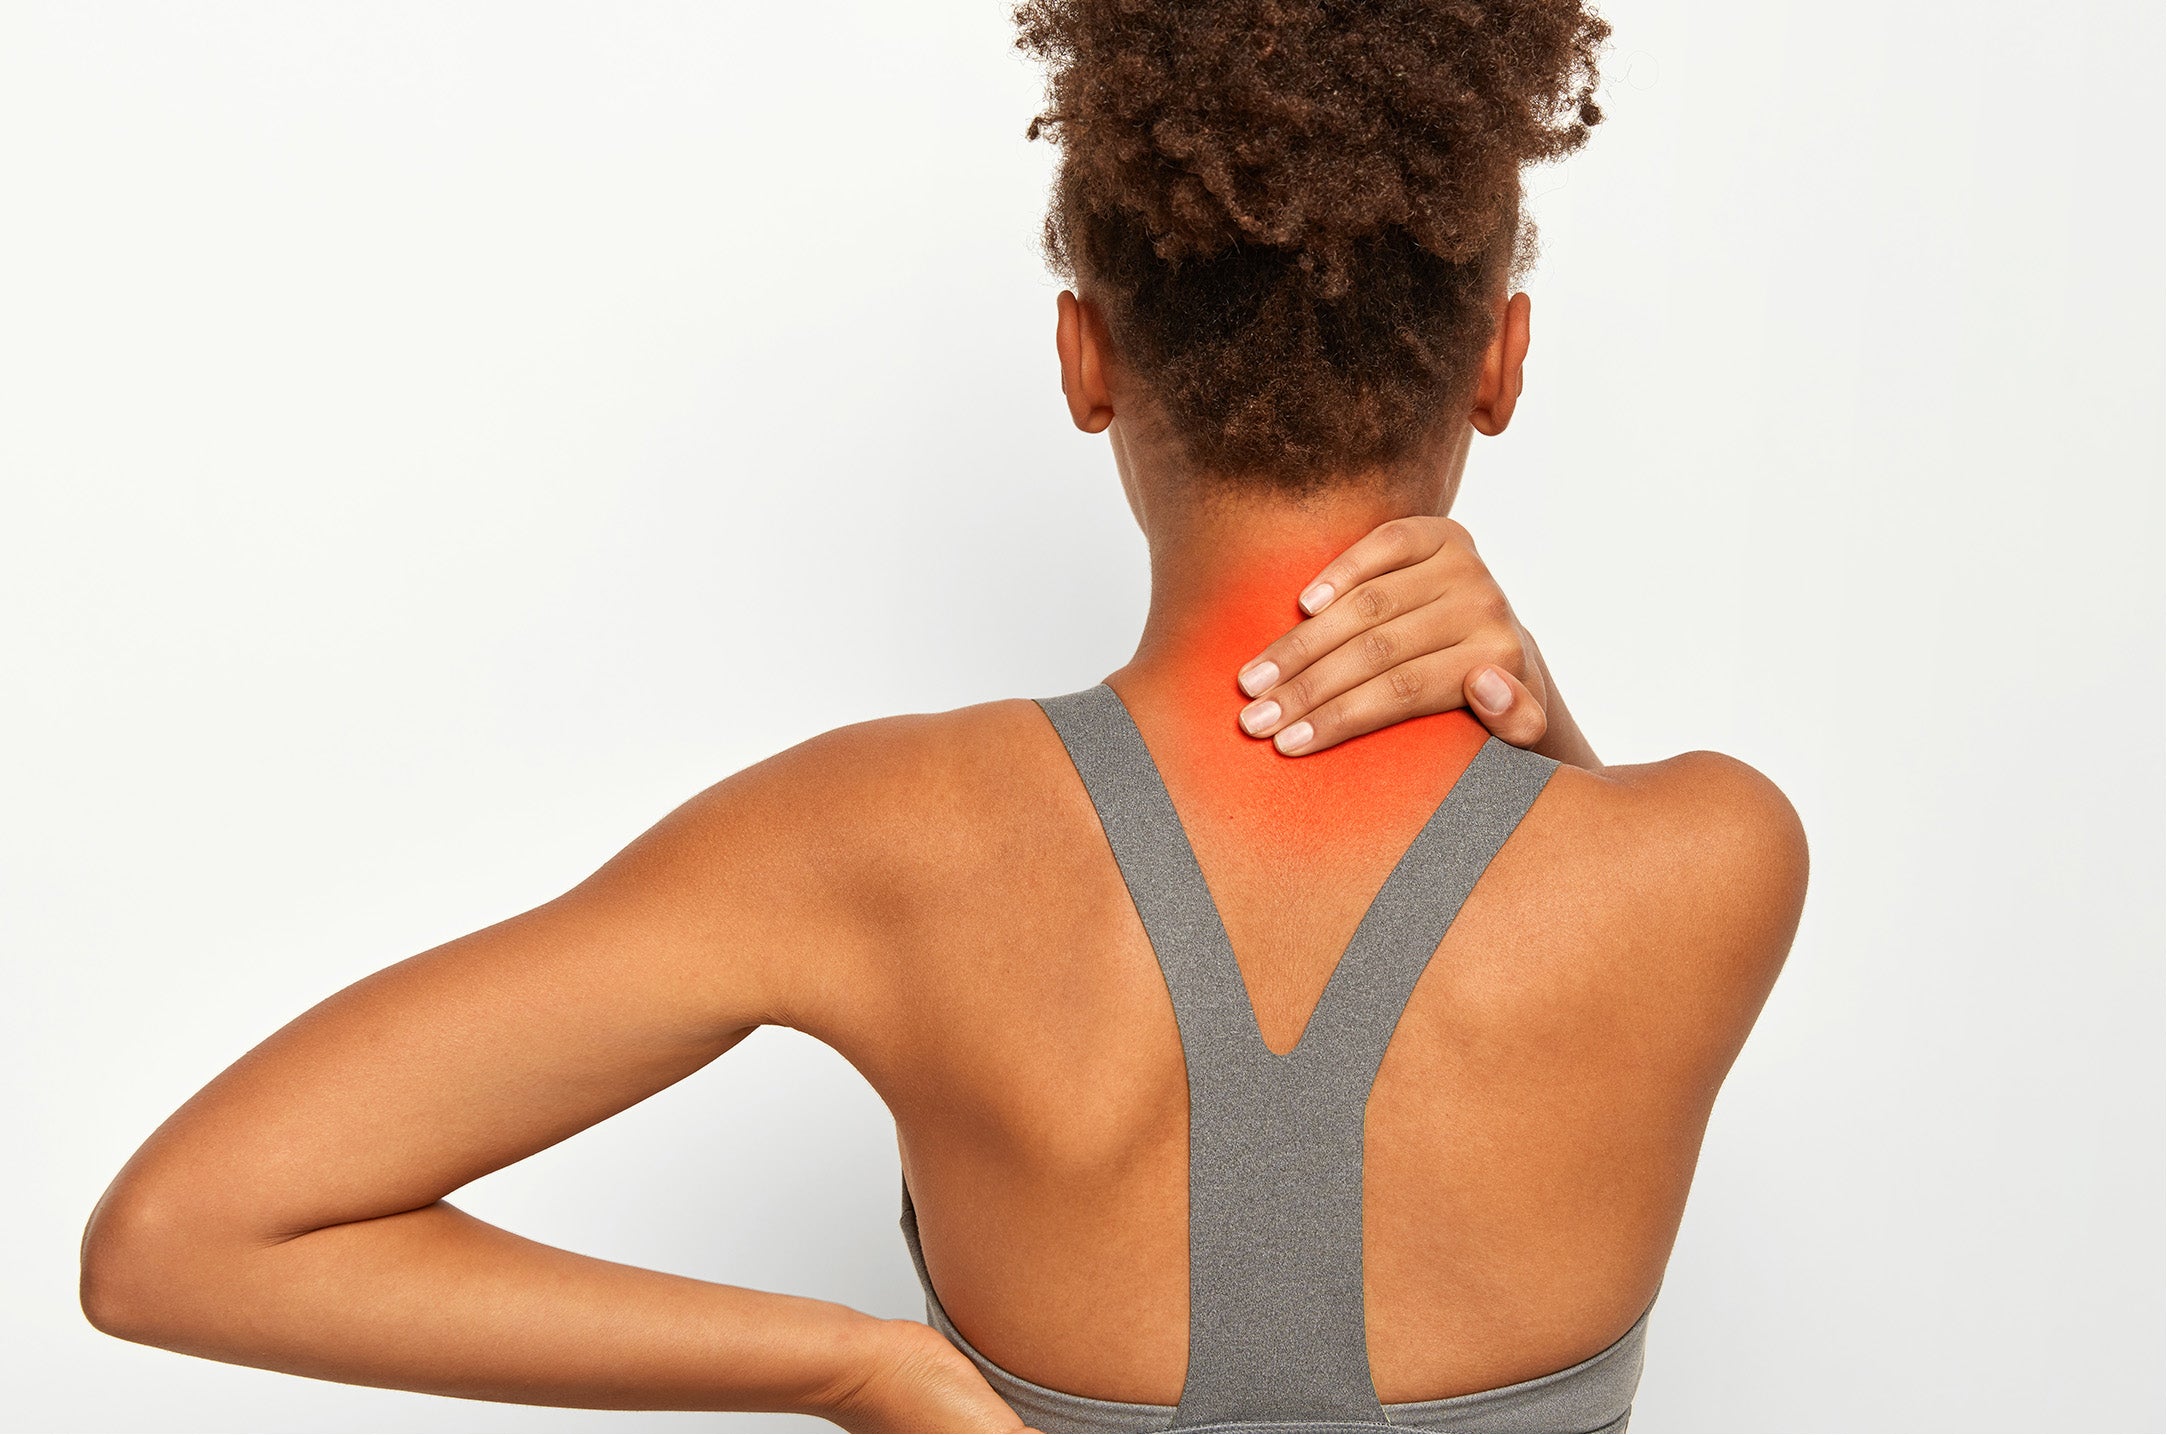 Neck Exercises for Scoliosis: How to Treat Neck Scoliosis Through Movement